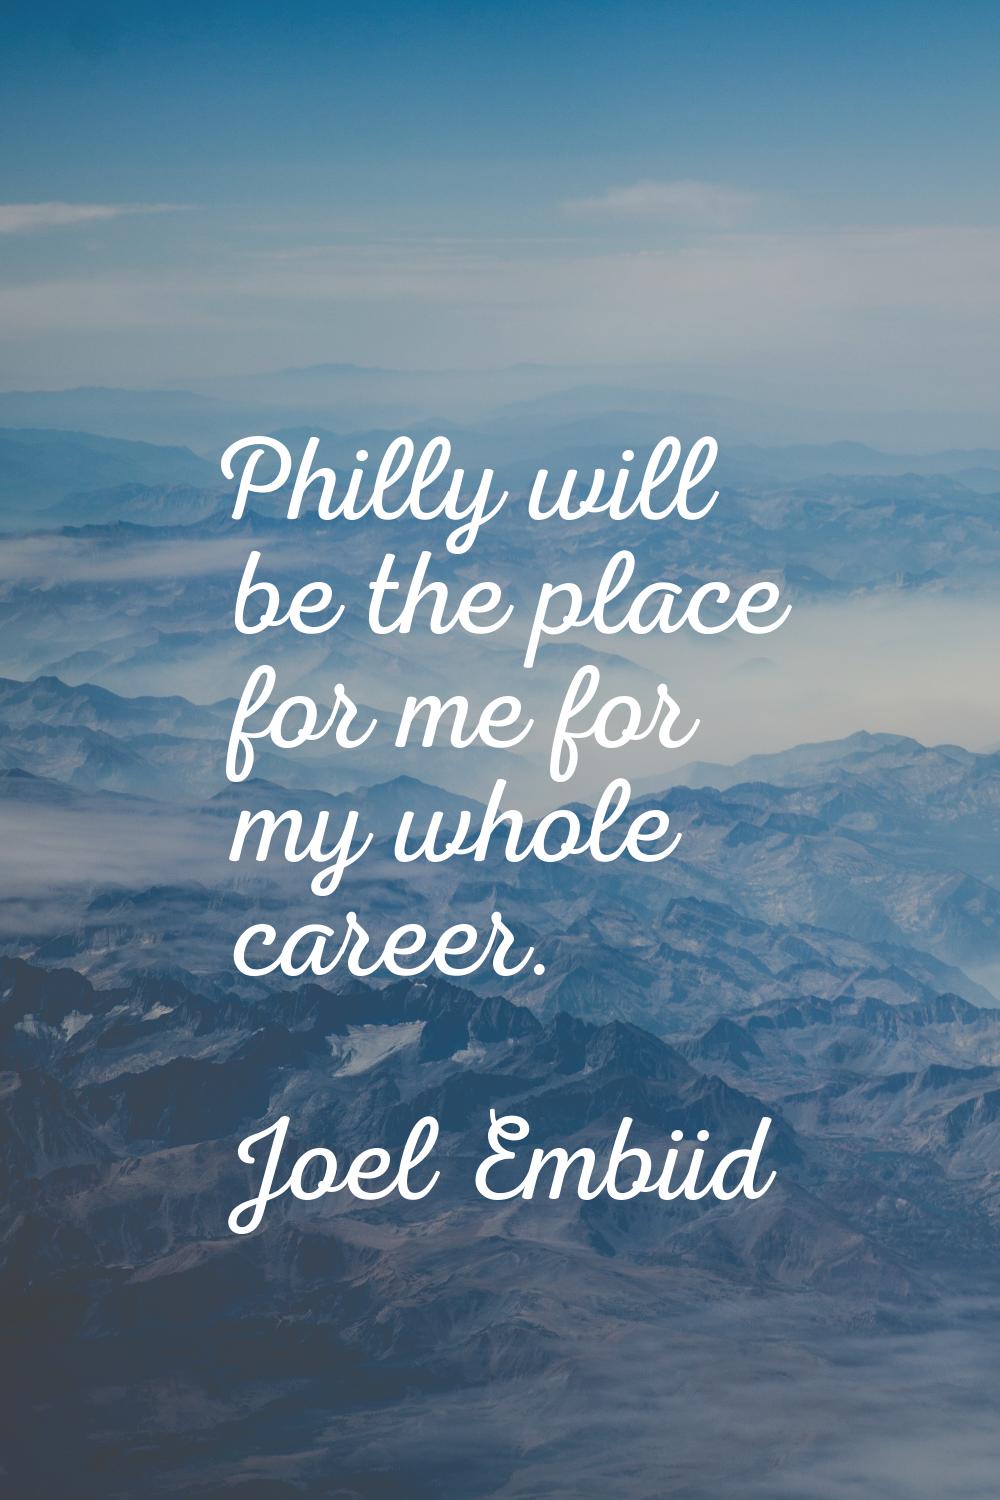 Philly will be the place for me for my whole career.